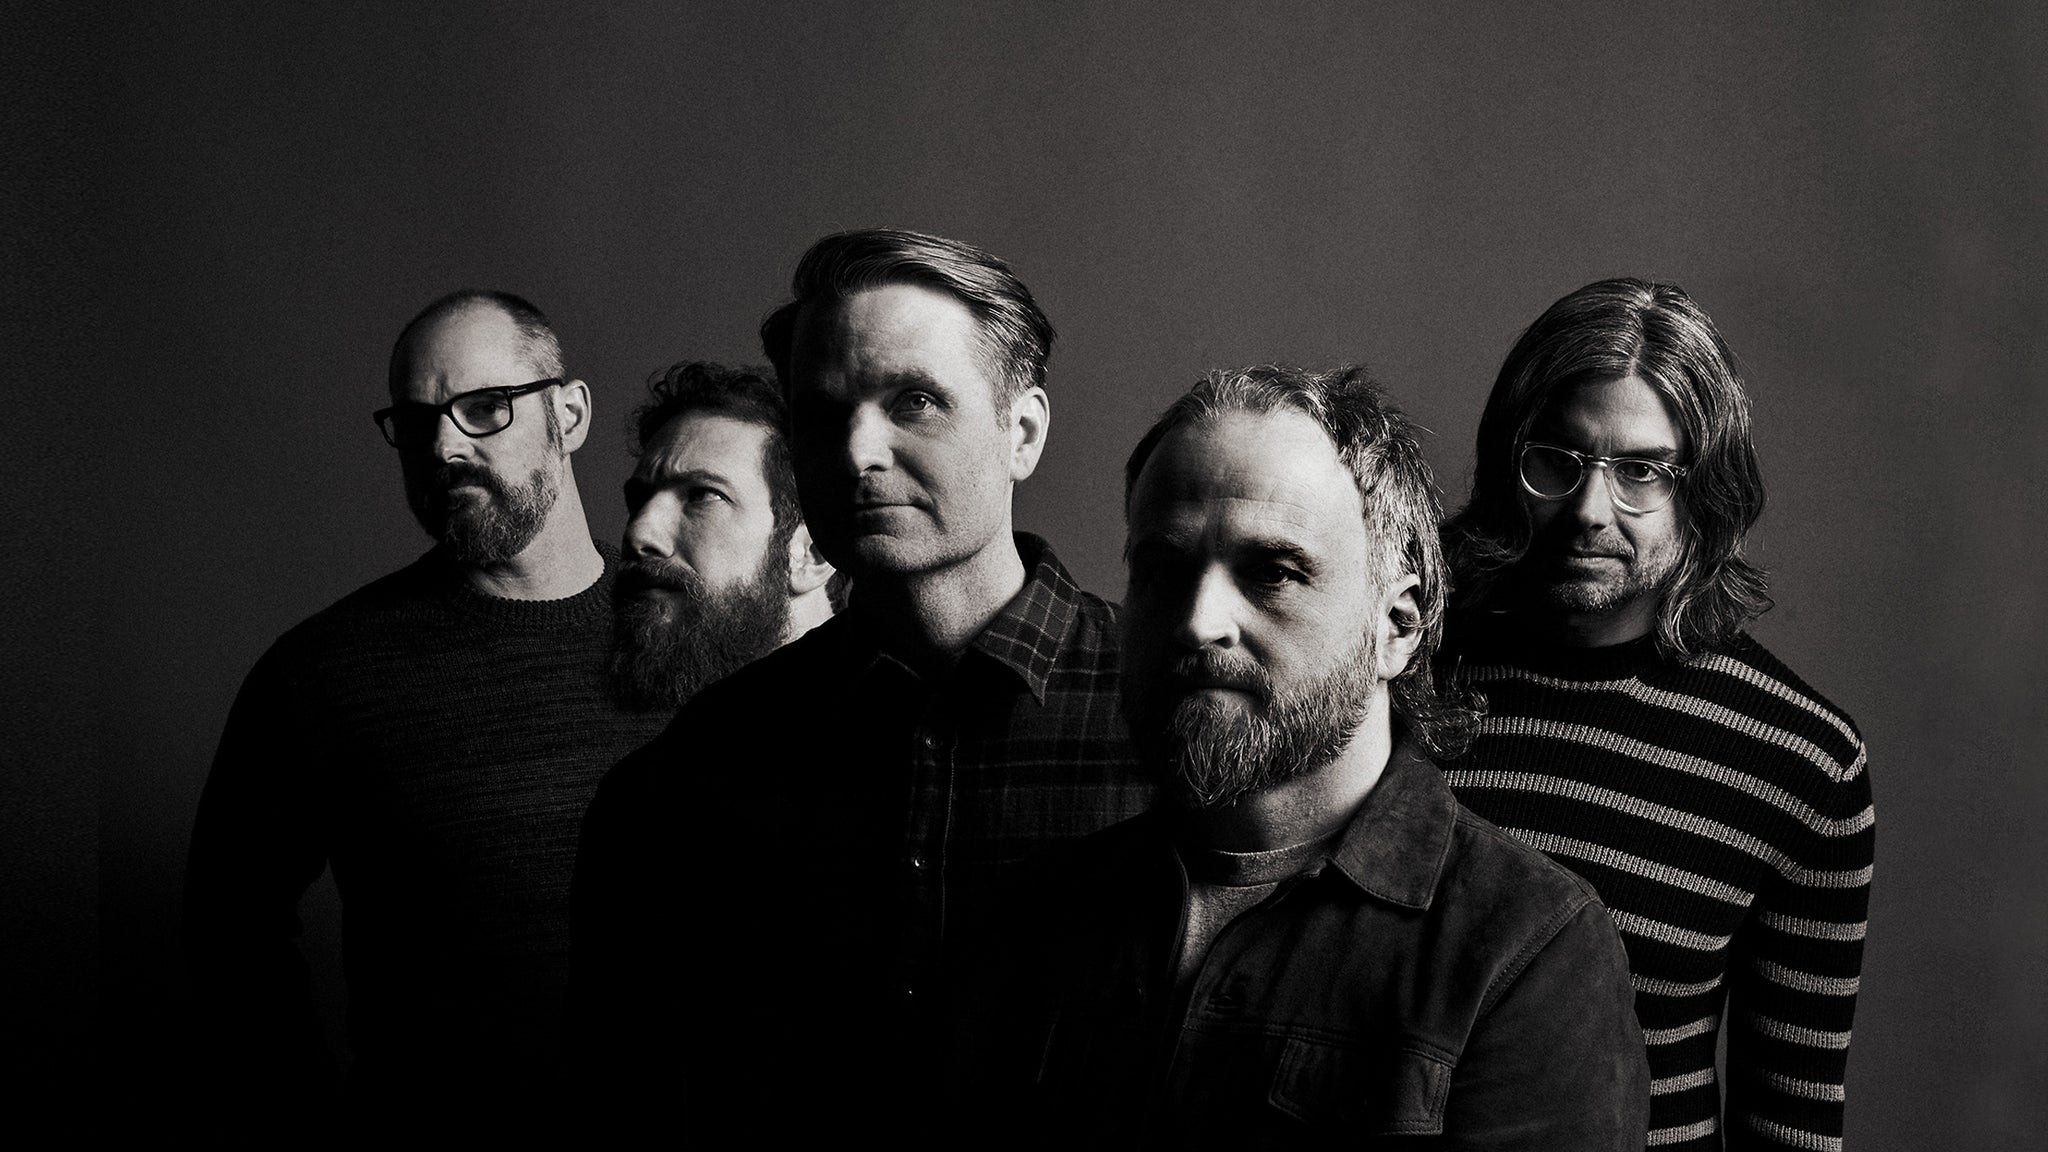 Death Cab for Cutie: Asphalt Meadows Tour With Special Guest Lomelda  presale c0de for advance tickets in Indianapolis